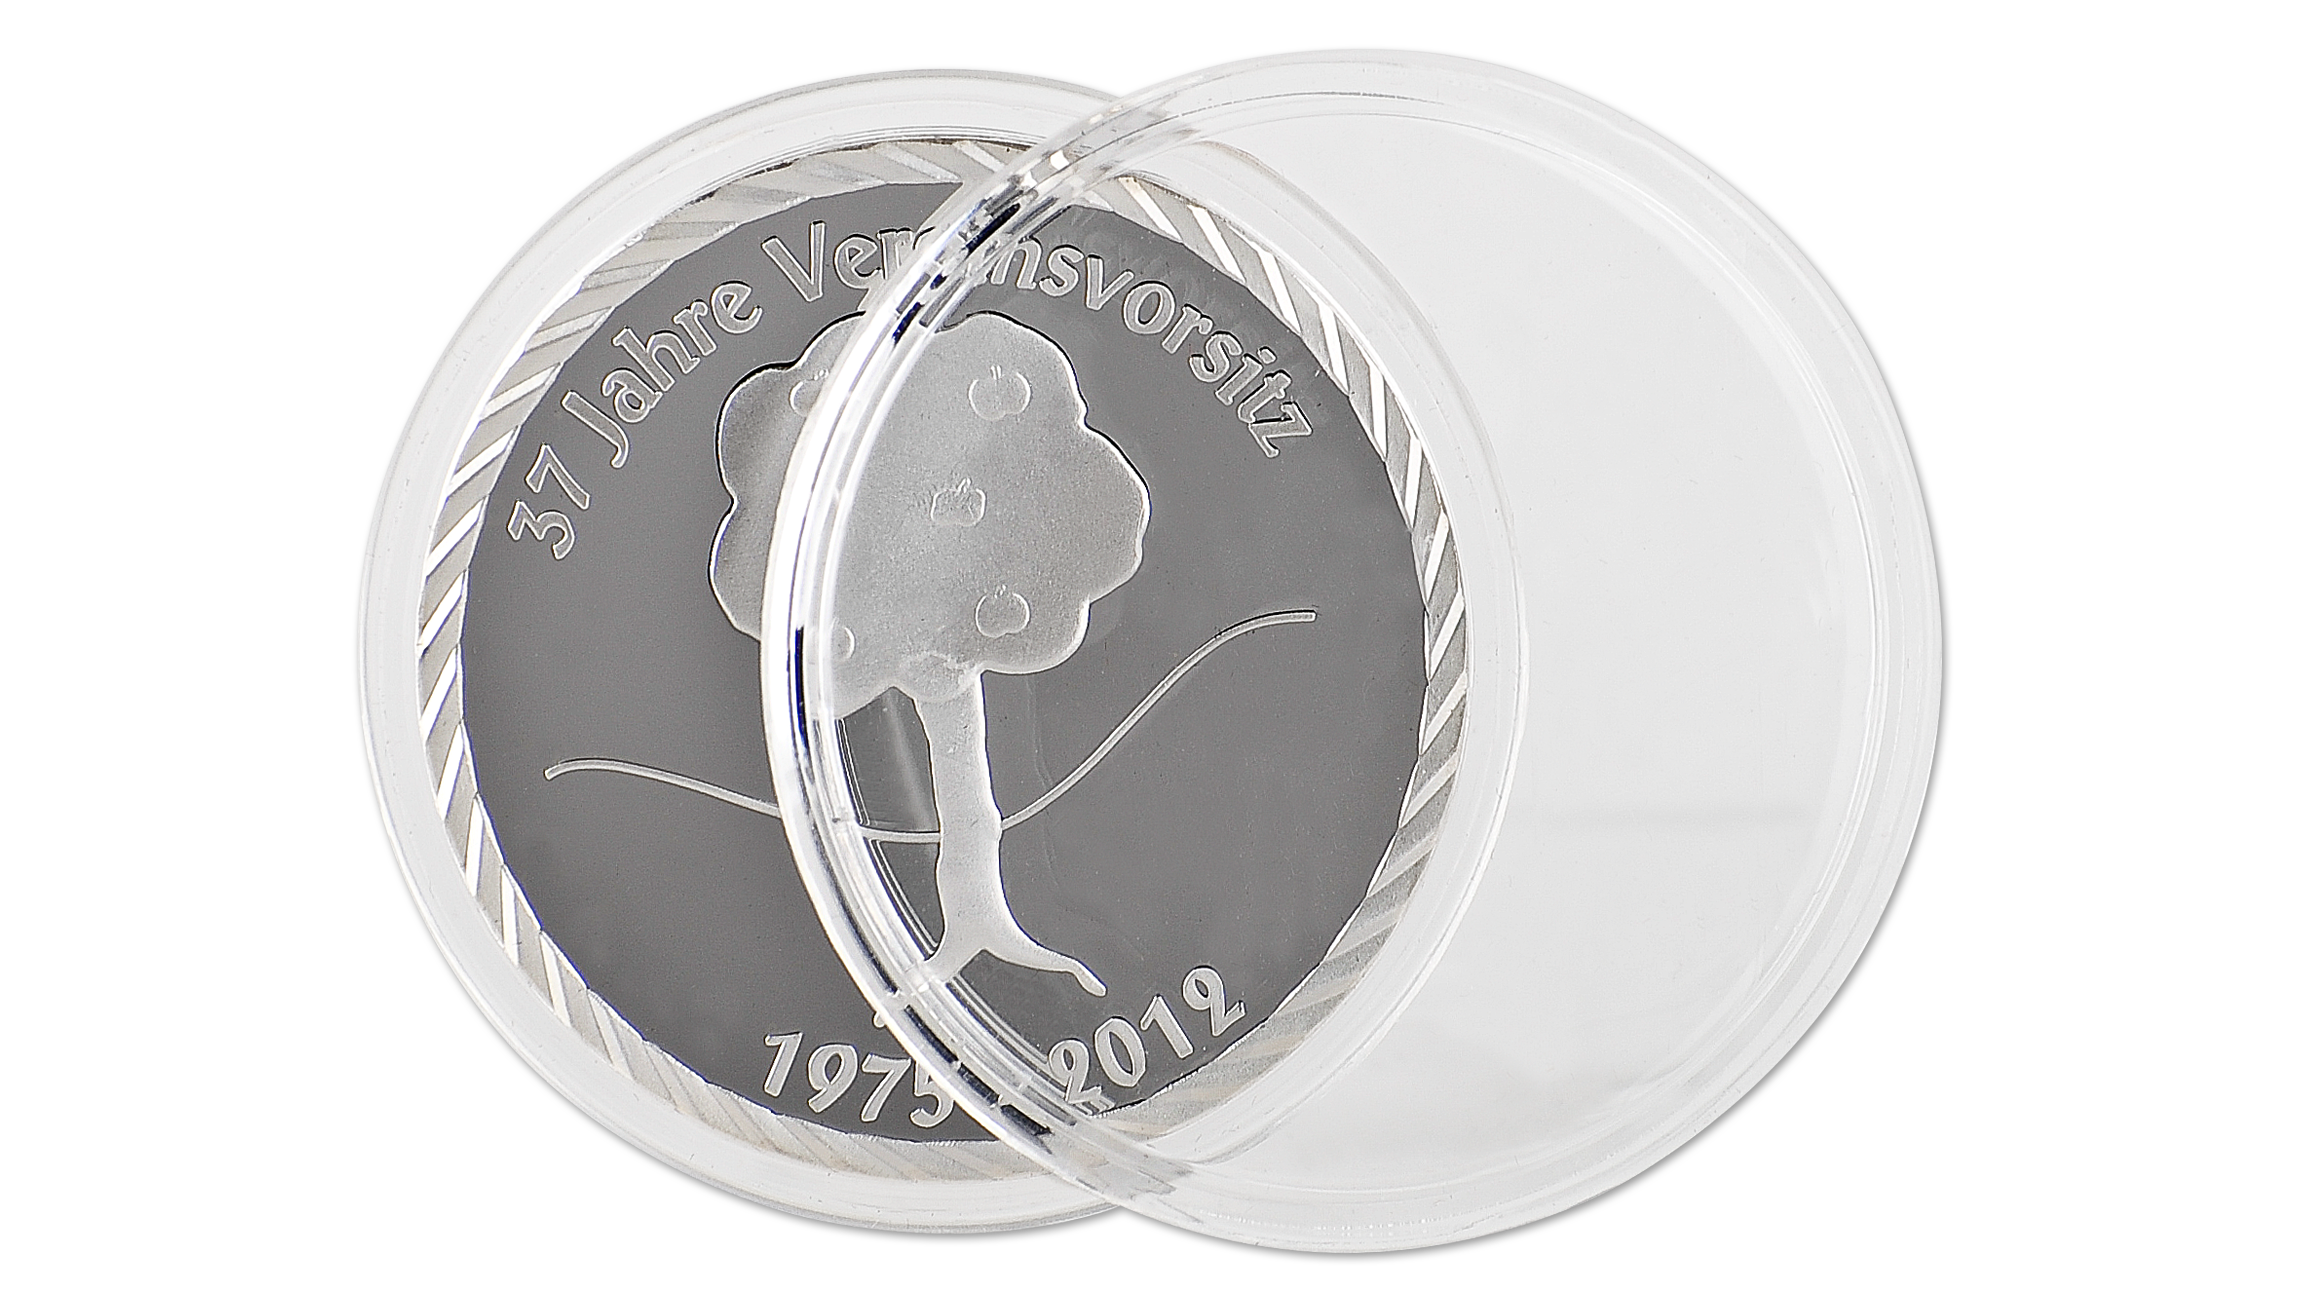 Transparent acryllic cup as affordable coin packaging